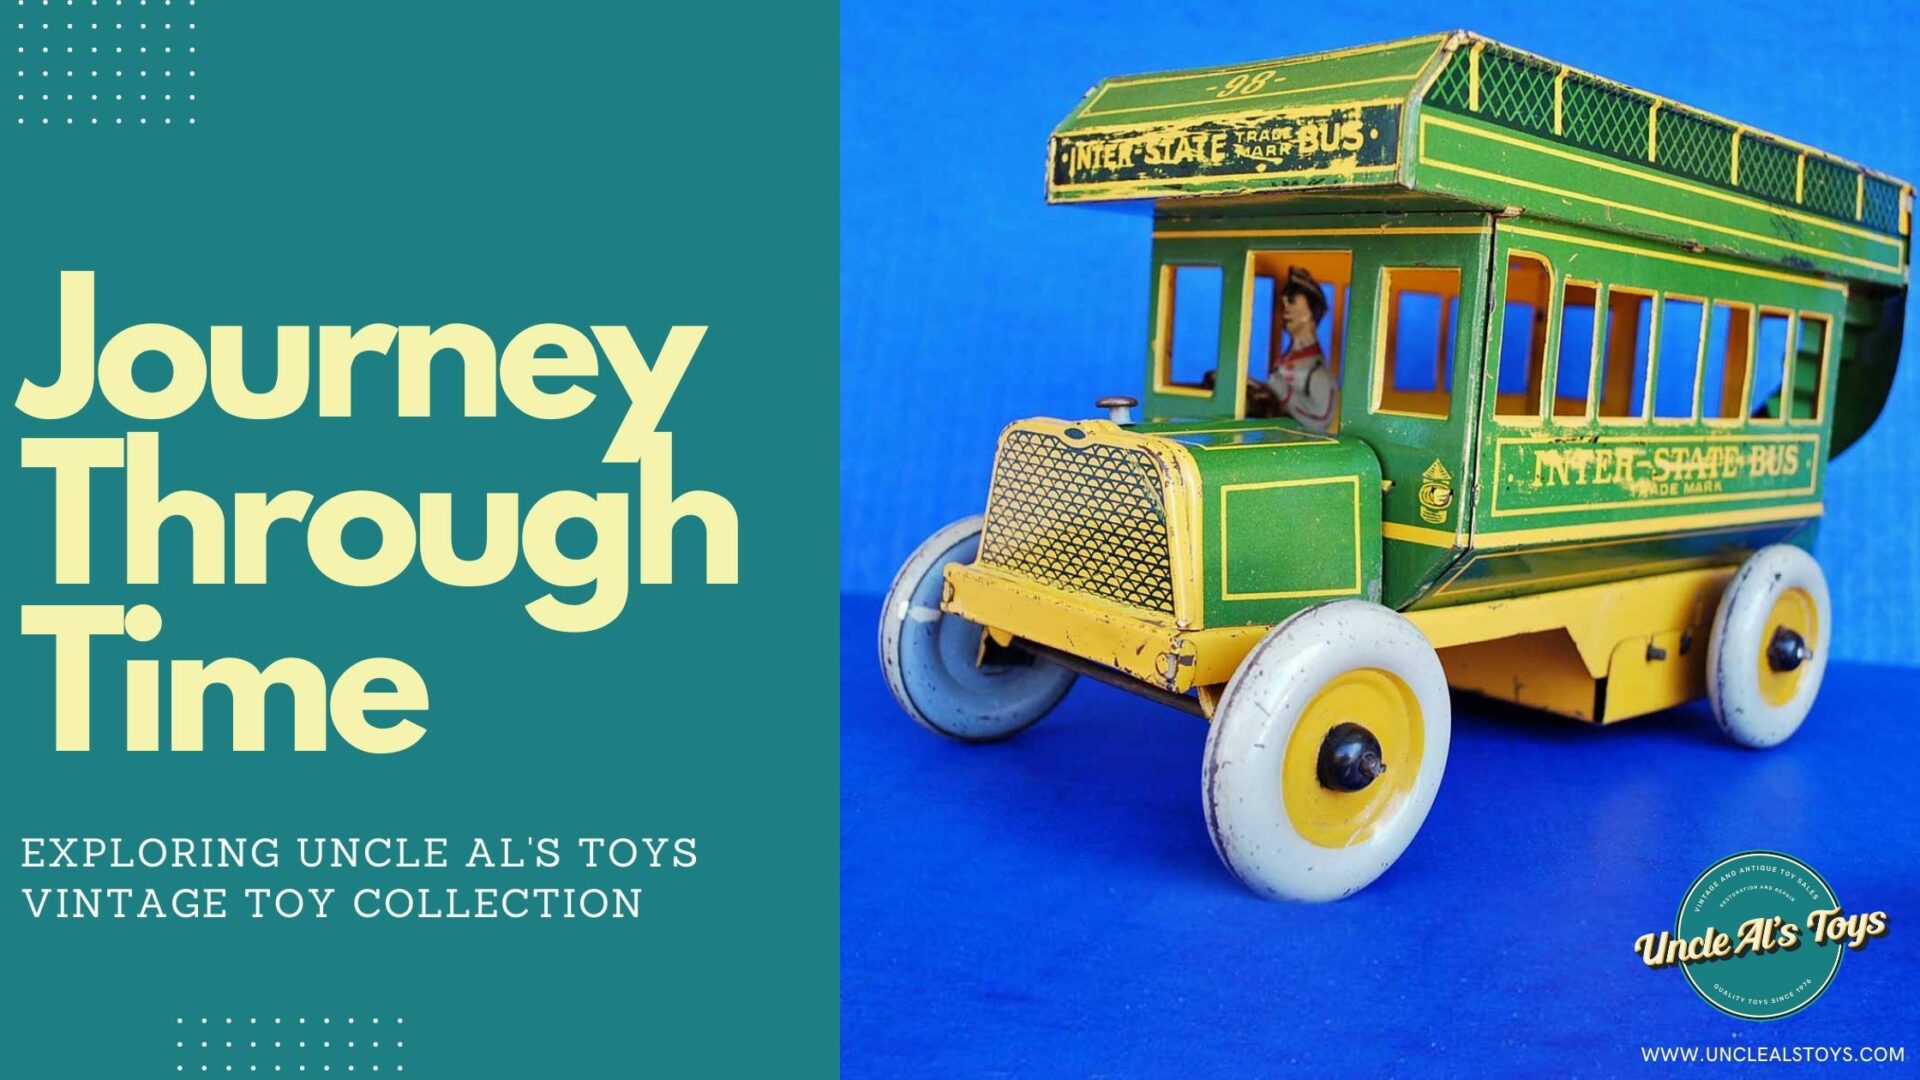 Journey Through Time: Exploring Uncle Al's Toys Vintage Toy Collection